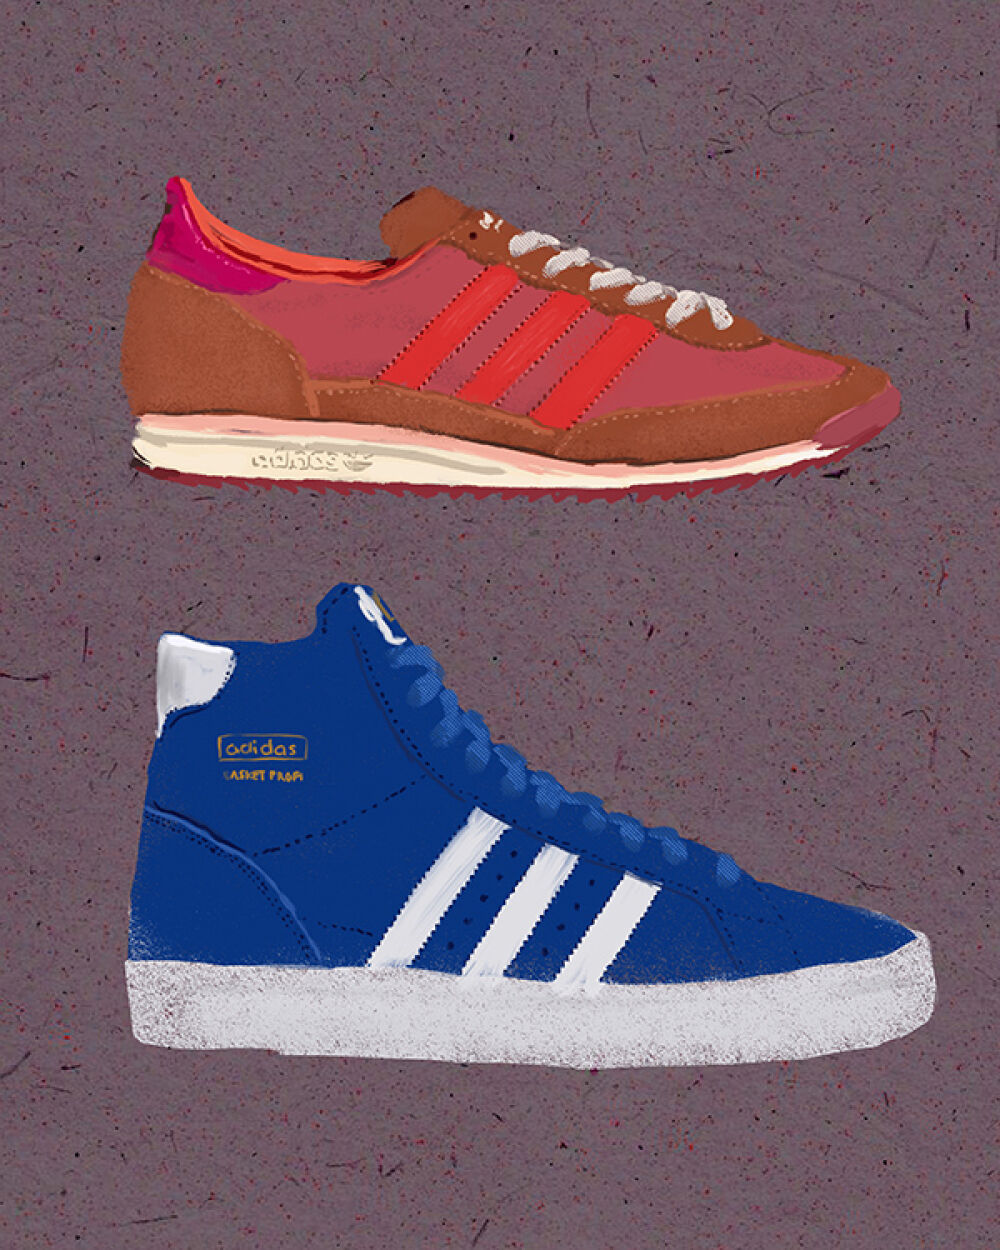 Retro style sneakers illustrated by Christina Gliha for Adidas